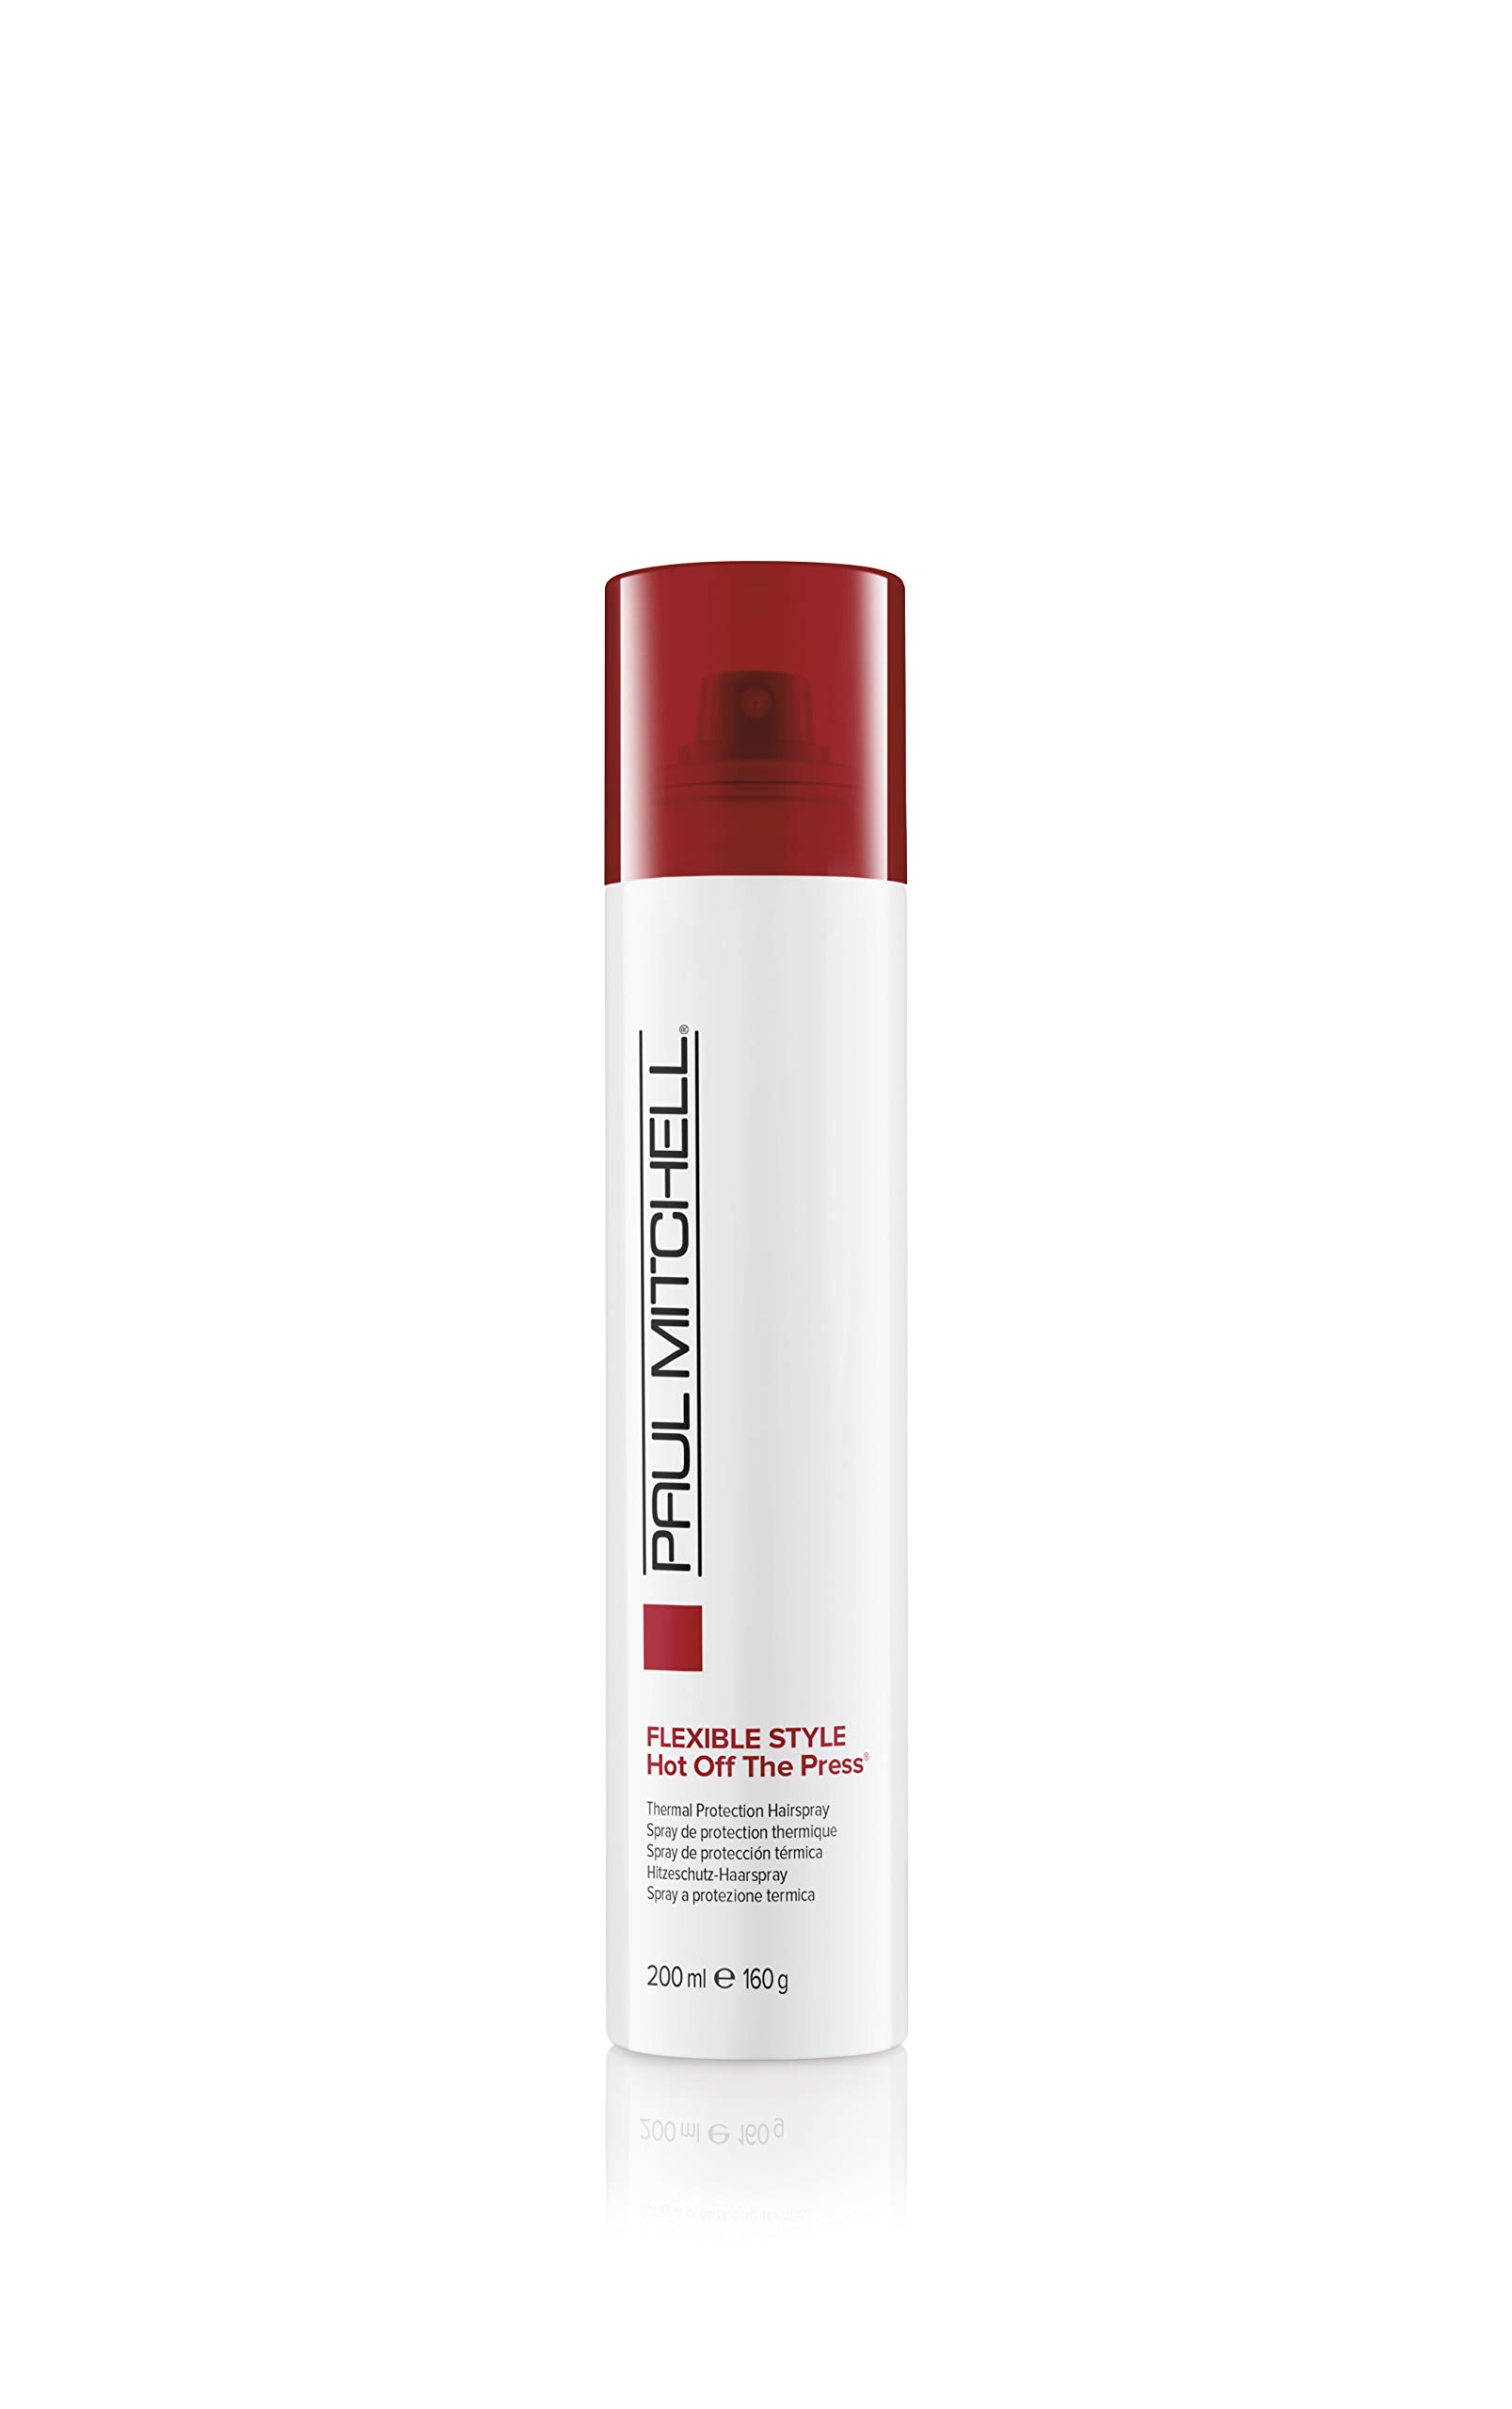 Paul Mitchell Flexible Style Hot Off The Press 200ml/160g